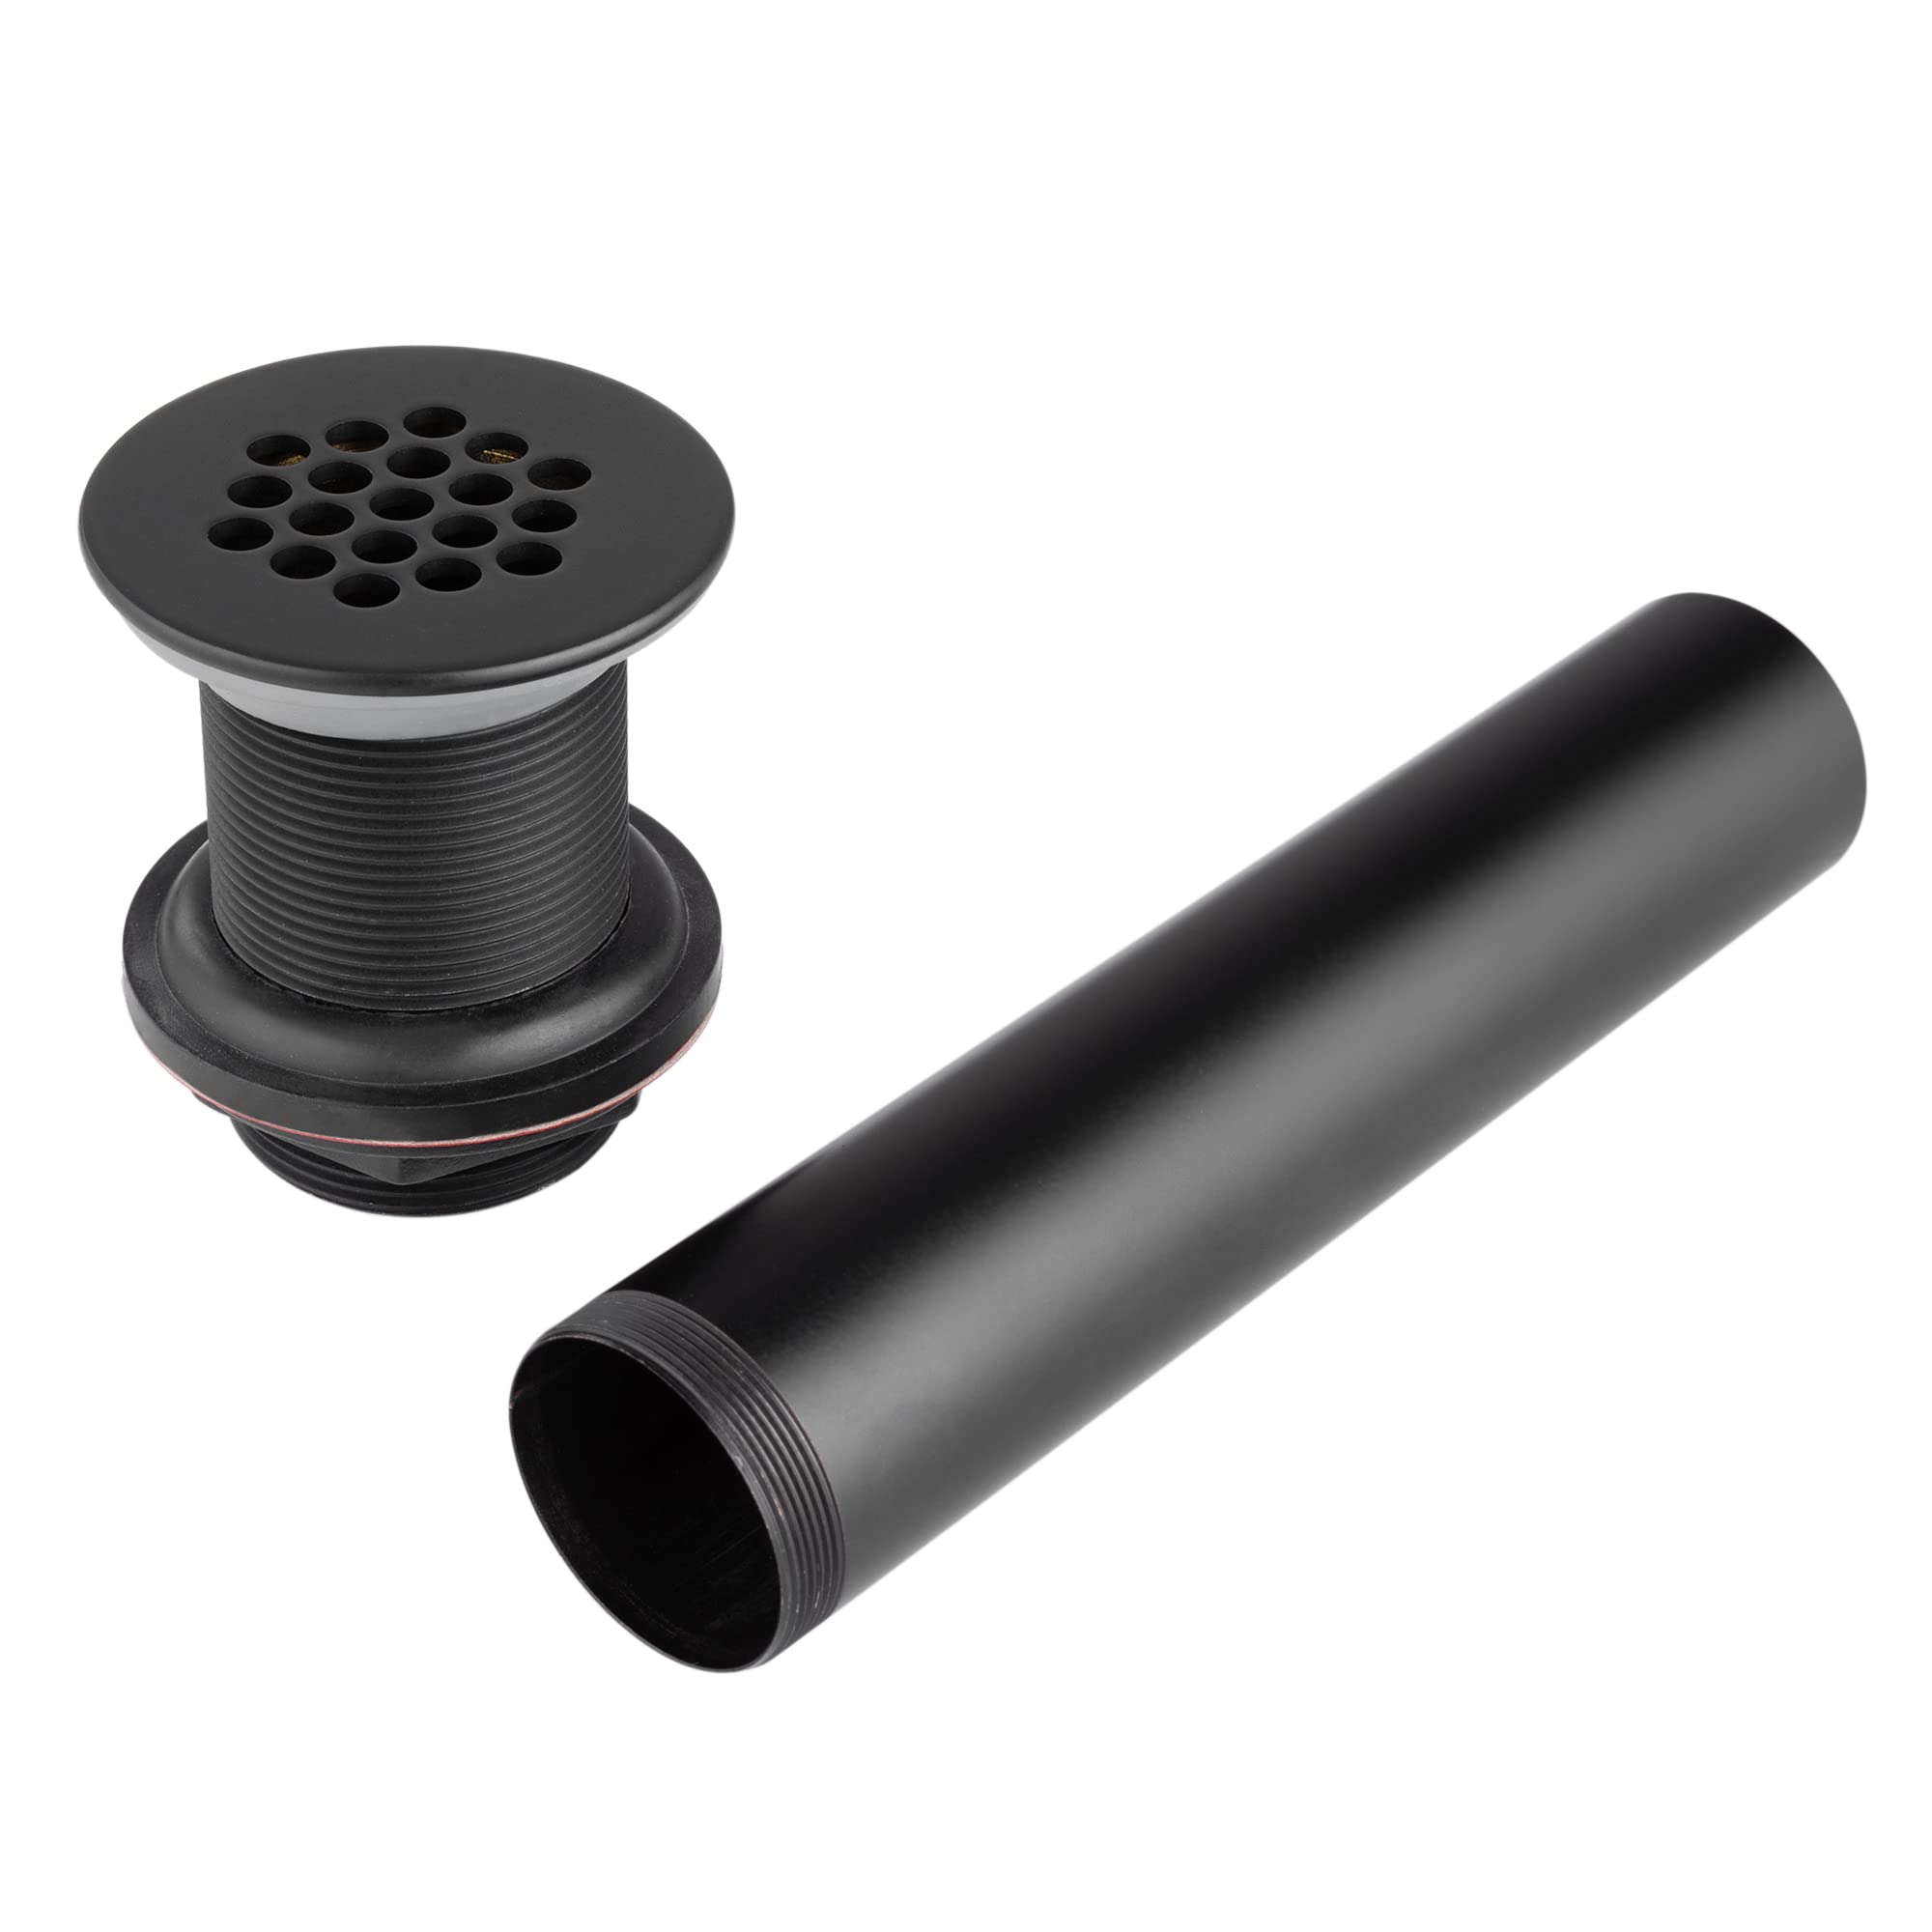 Grid Drain Strainer Assembly Without Overflow for Bathroom Sink, C.O. Plug Grid Lavatory Drain, Bathroom Sink Grid Strainer by Artiwell, Matte Black